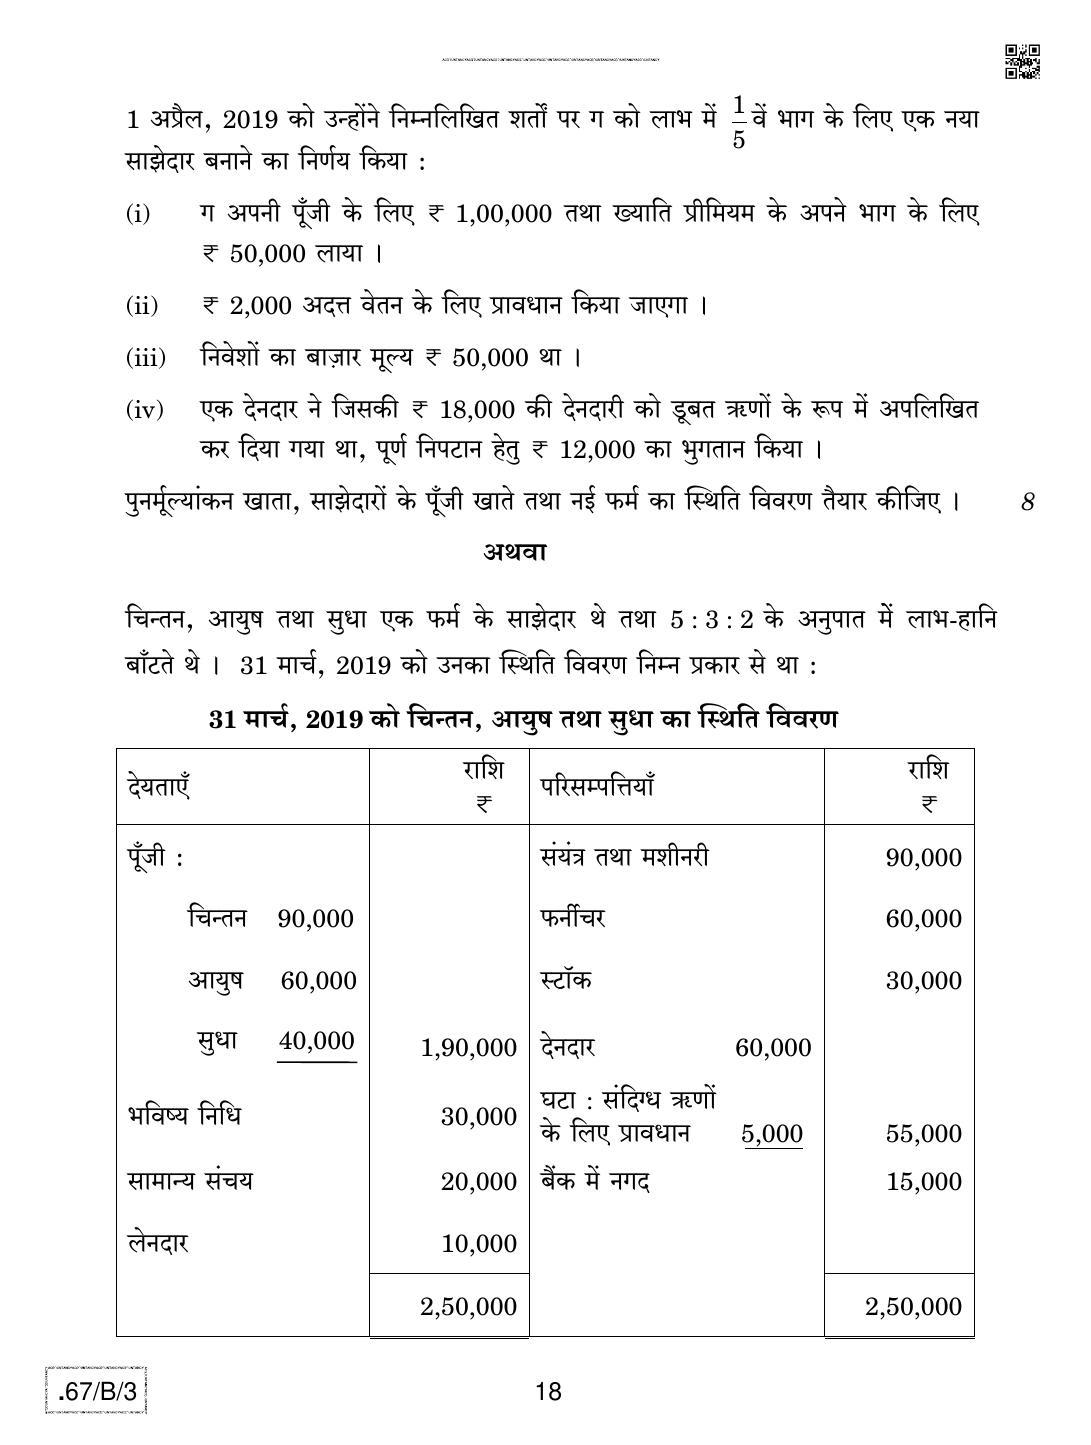 CBSE Class 12 67-C-3 - Accountancy 2020 Compartment Question Paper - Page 18